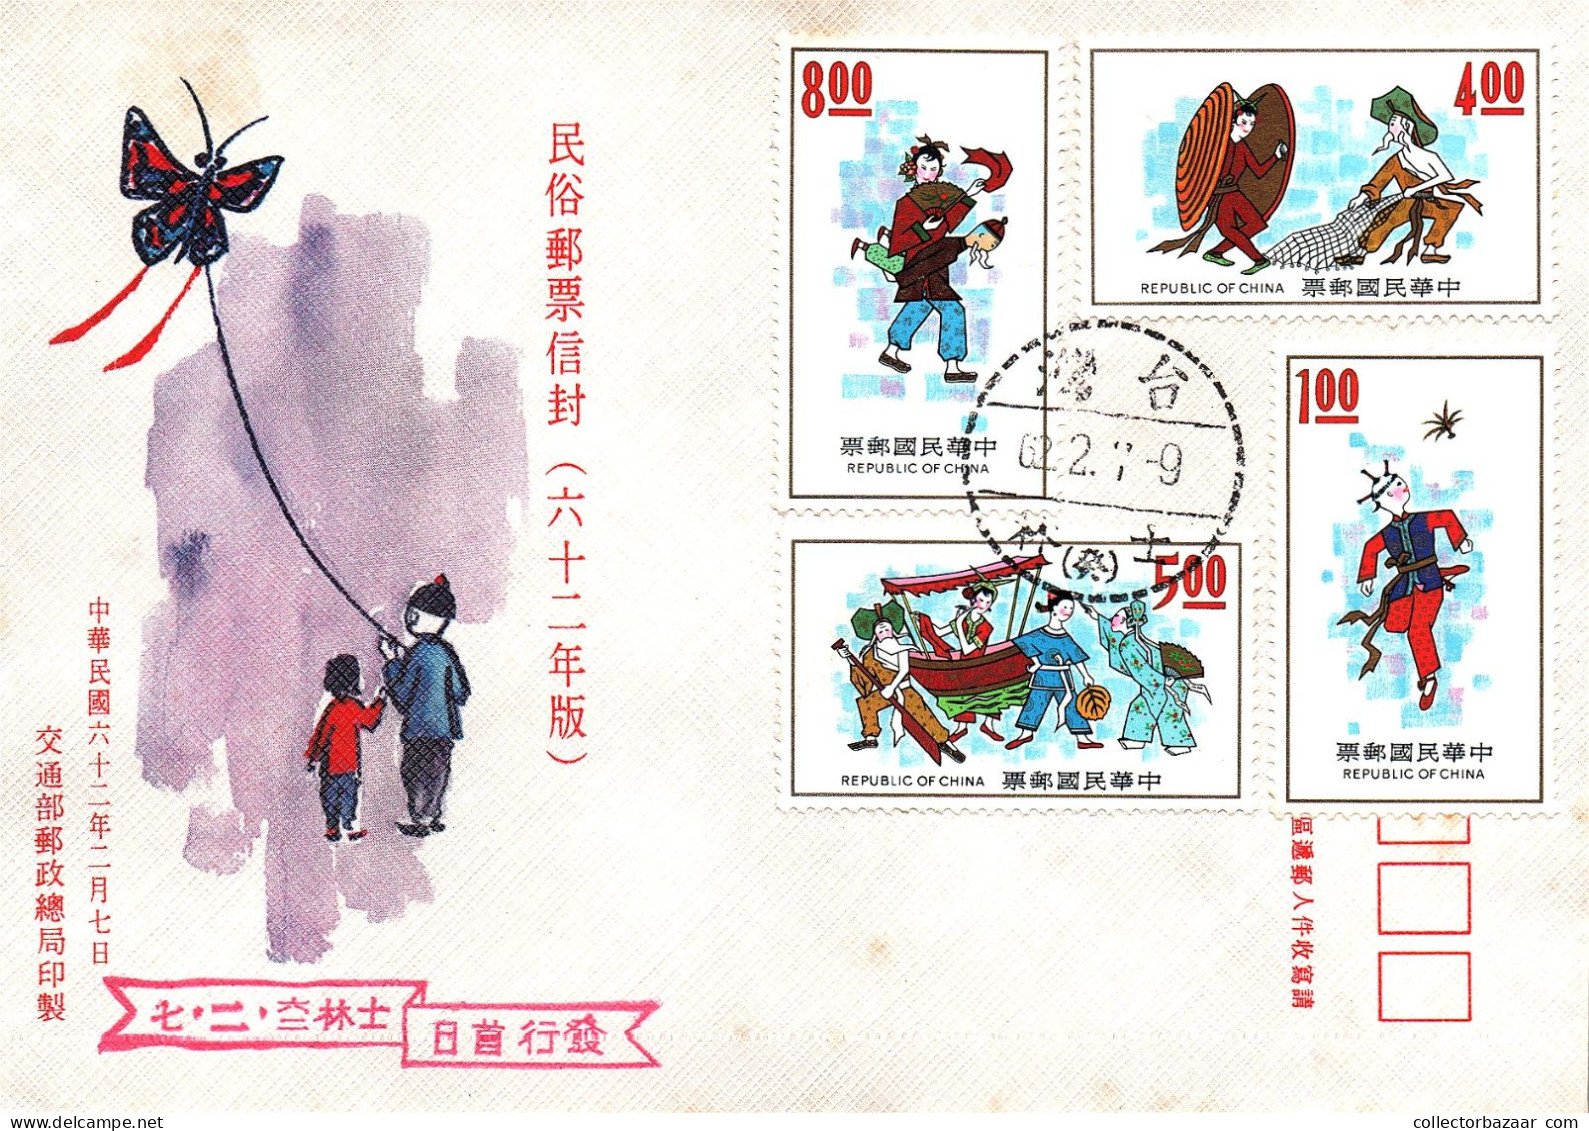 Taiwan Formosa Republic Of China FDC Art Paintings Drawings Traditional Costumes Kids Playing - 8$,5$,4$ And 1$ Stamps - FDC